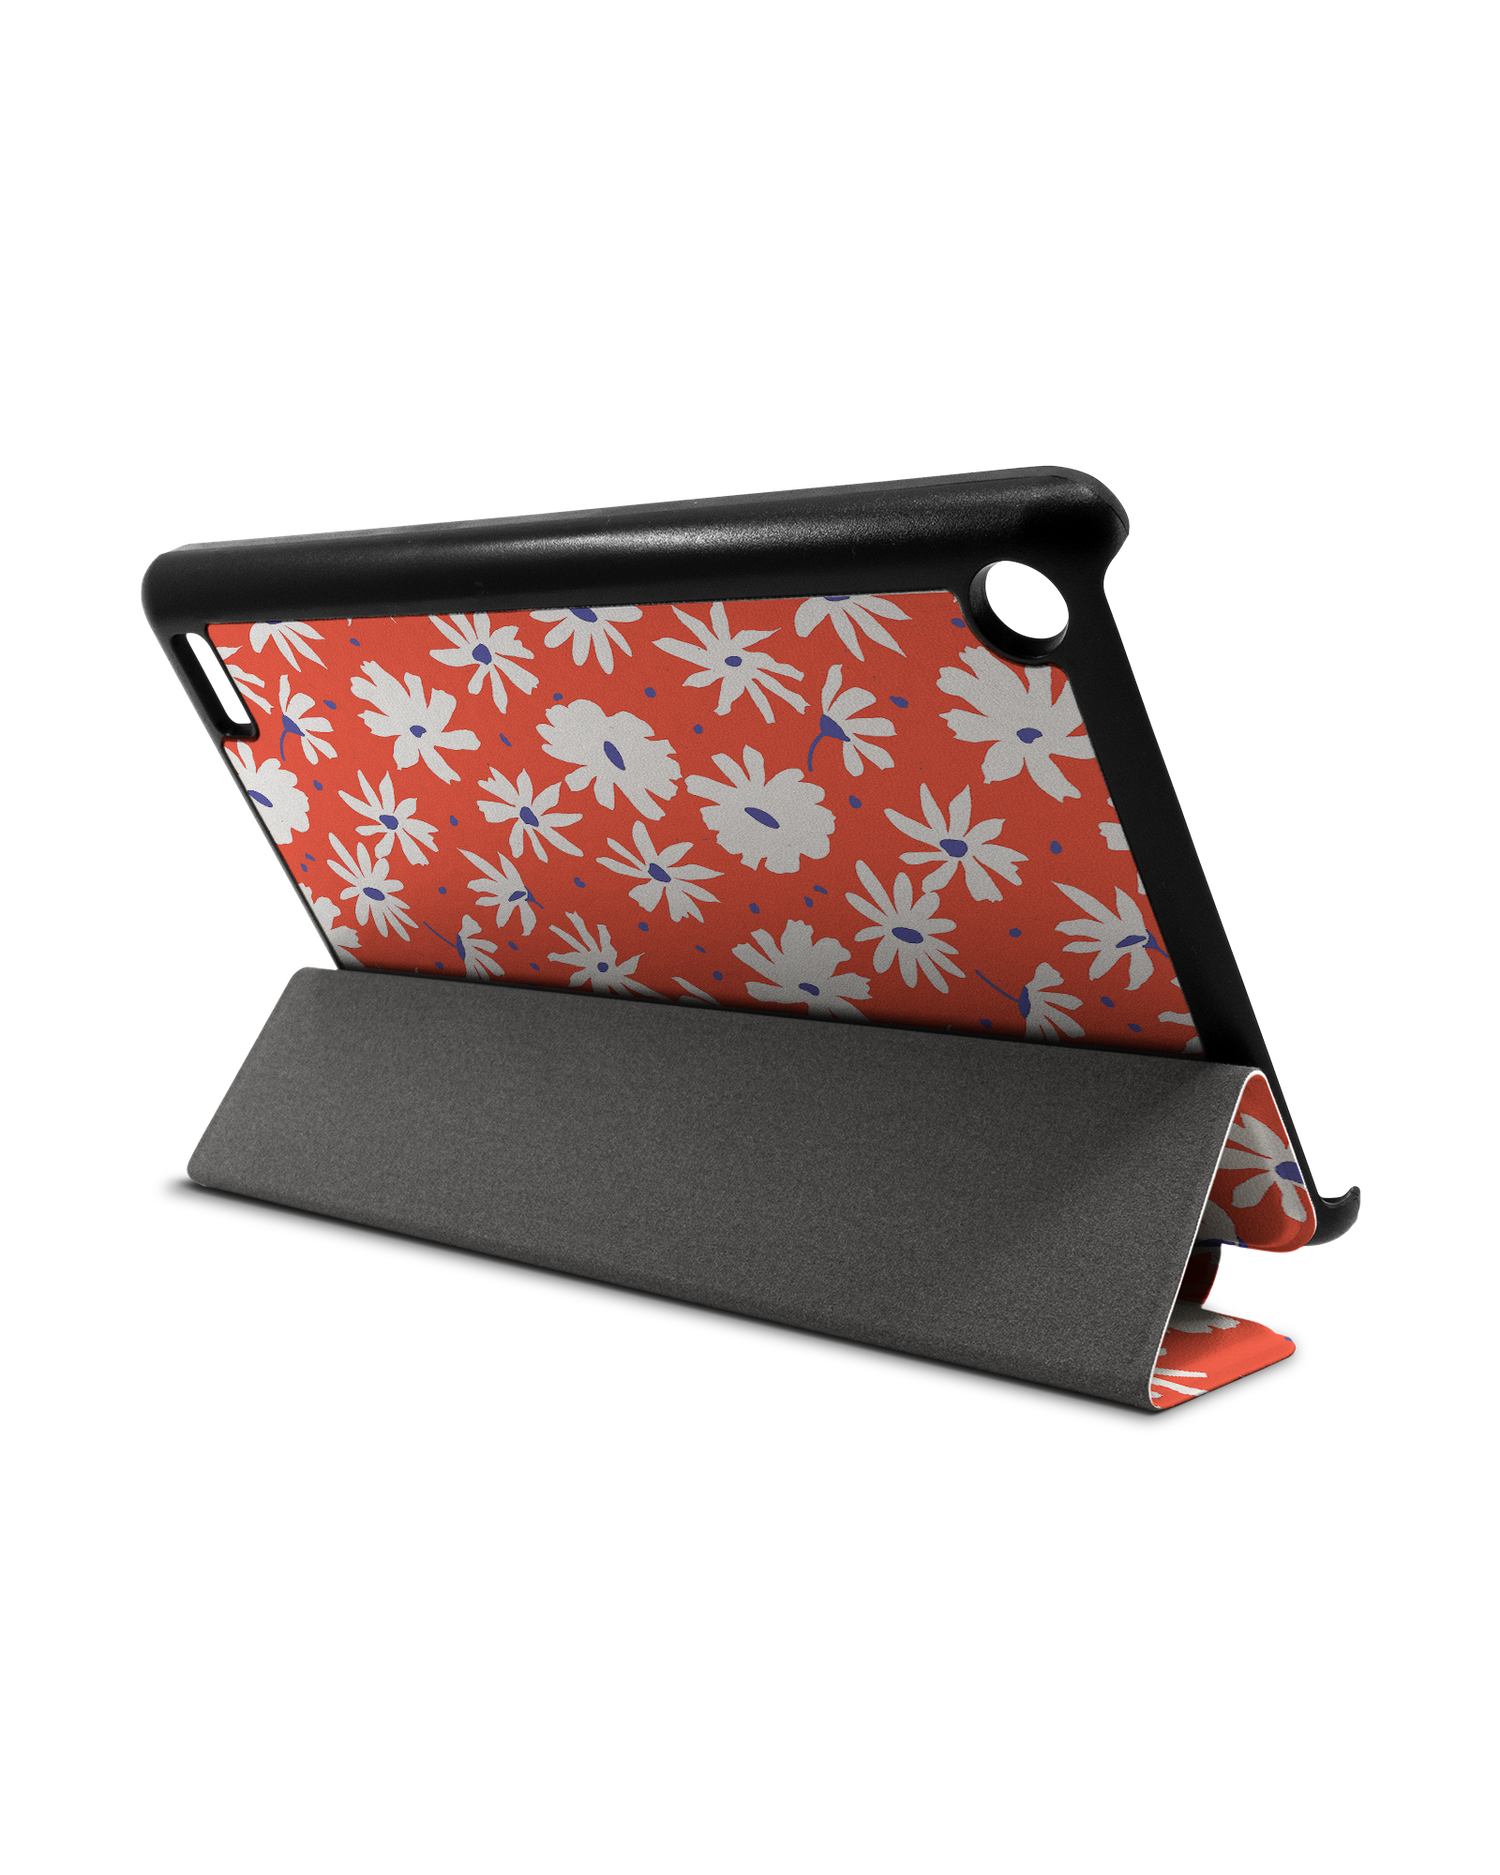 Retro Daisy Tablet Smart Case for Amazon Fire 7: Used as Stand